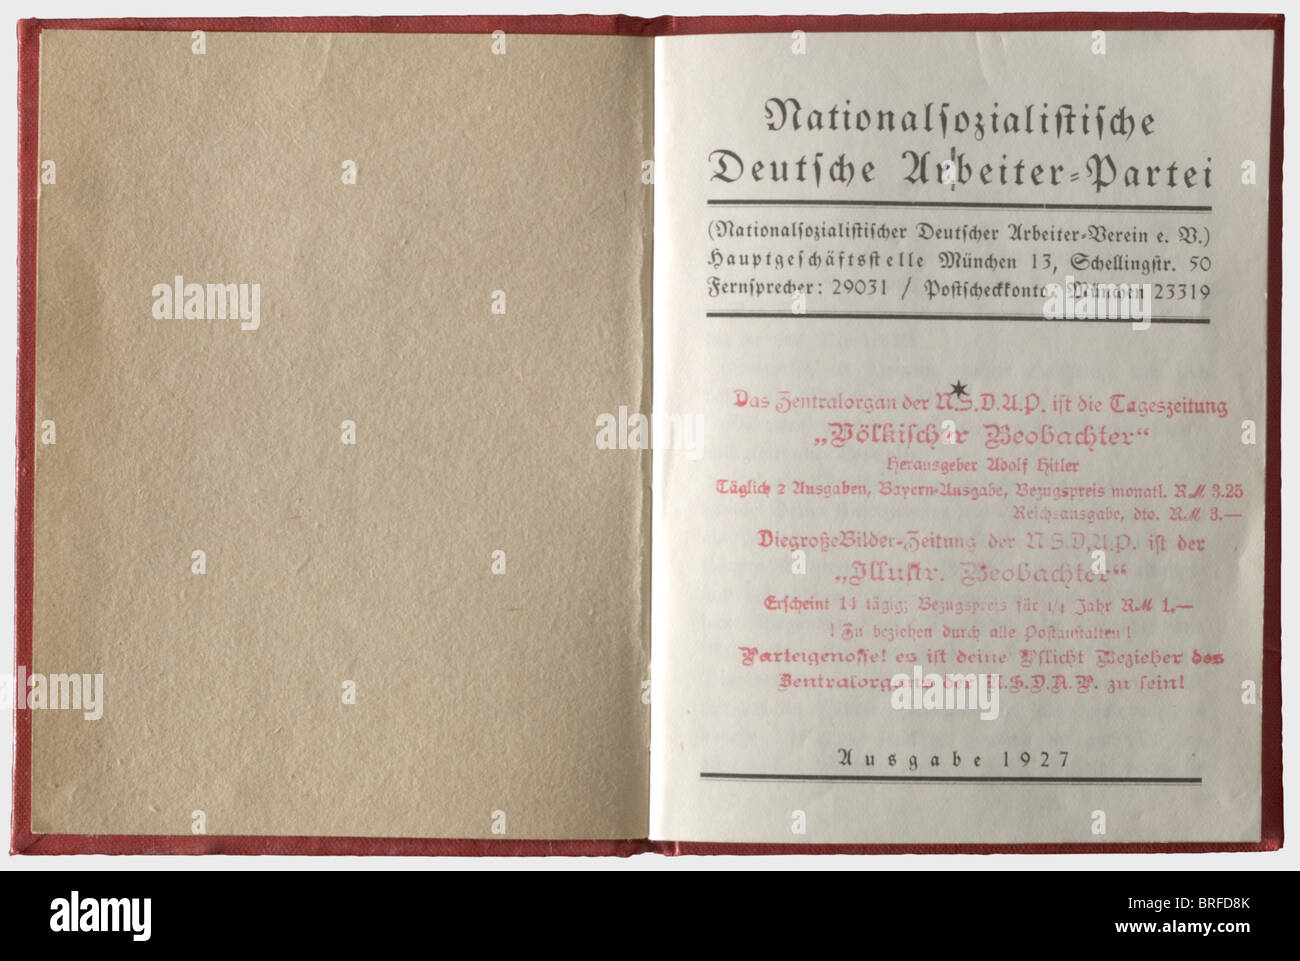 Artur Dinter - NSDAP membership book number '5'., Entry into the party on 17.4.1925, the book was issued on 3.5.1927 by the Reich Administration and bears the ink signatures of Adolf Hitler and treasurer Schwarz. The front cover punched, with (printed) photo glued into the book. historic, historical, 1920s, 20th century, NS, National Socialism, Nazism, Third Reich, German Reich, Germany, German, National Socialist, Nazi, Nazi period, fascism, document, documents, object, objects, stills, clipping, clippings, cut out, cut-out, cut-outs, Stock Photo